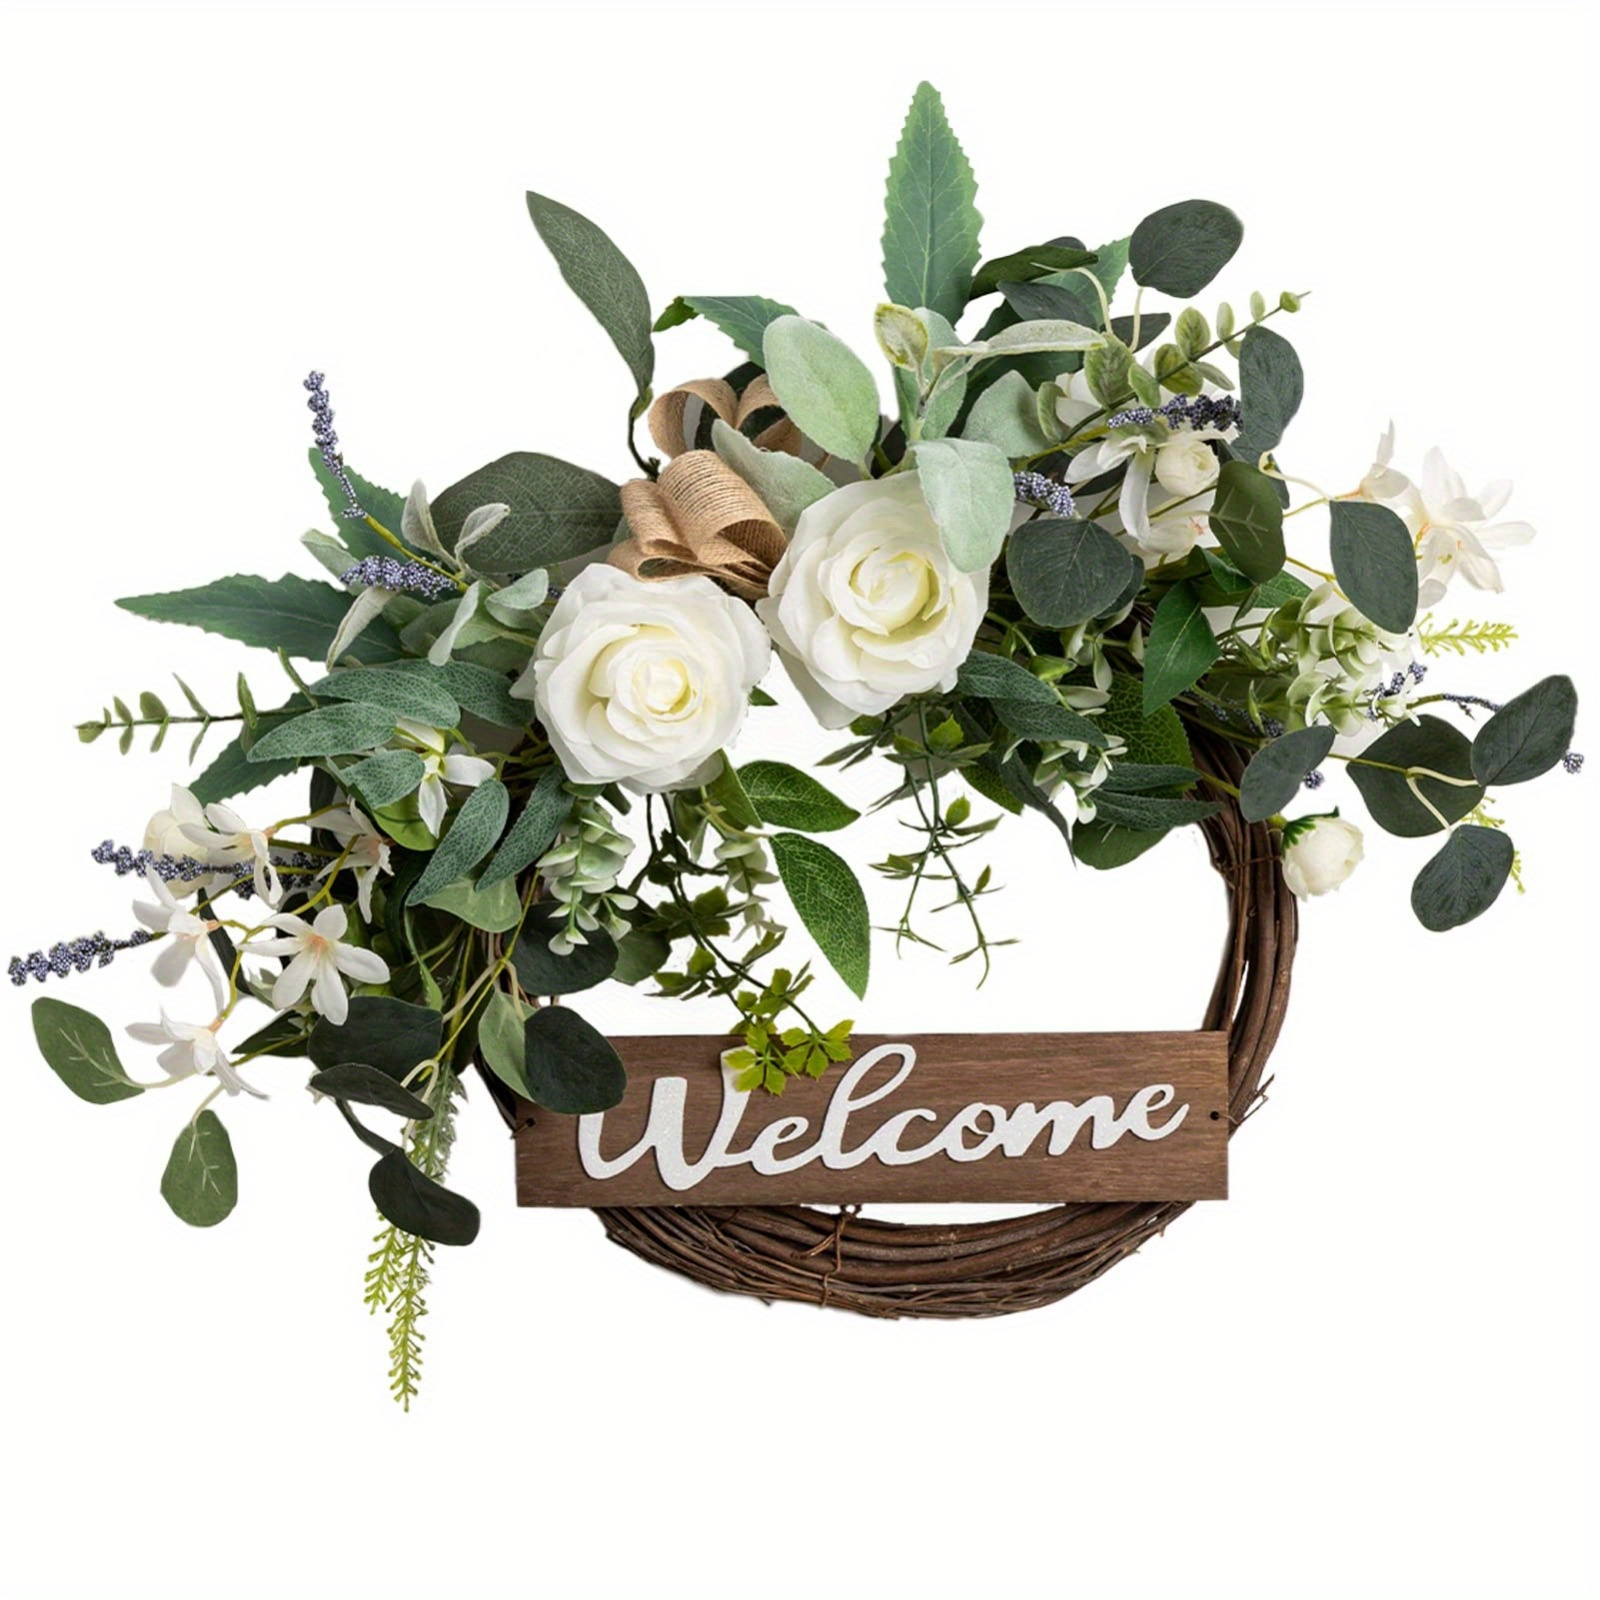 

Front Door Wreath With Welcome Artificial Eucalyptus Christmas Wreath Halloween Wreath For Front Door Autumn Wreath For Christmas Party Decorations, Welcome Wreath For All Seasons